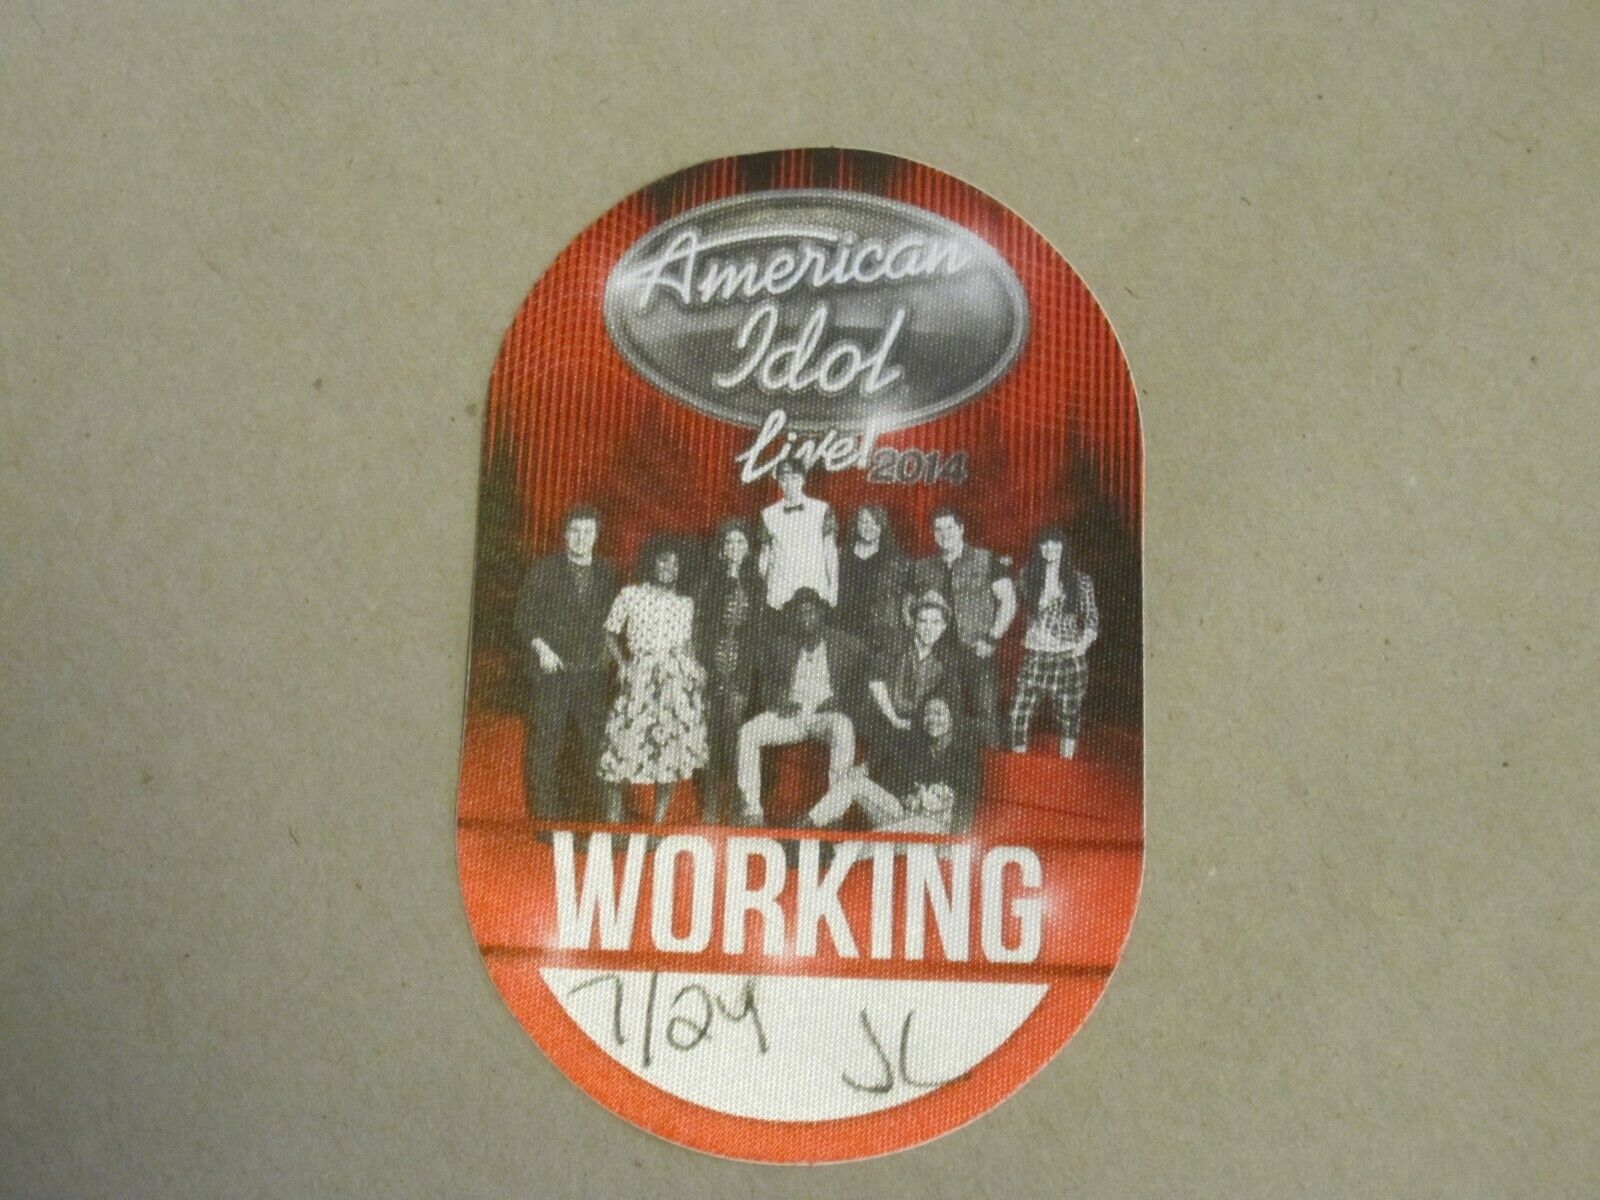 American Idol Live 2014 Tour Satin Local Crew Backstage Pass Unpeeled